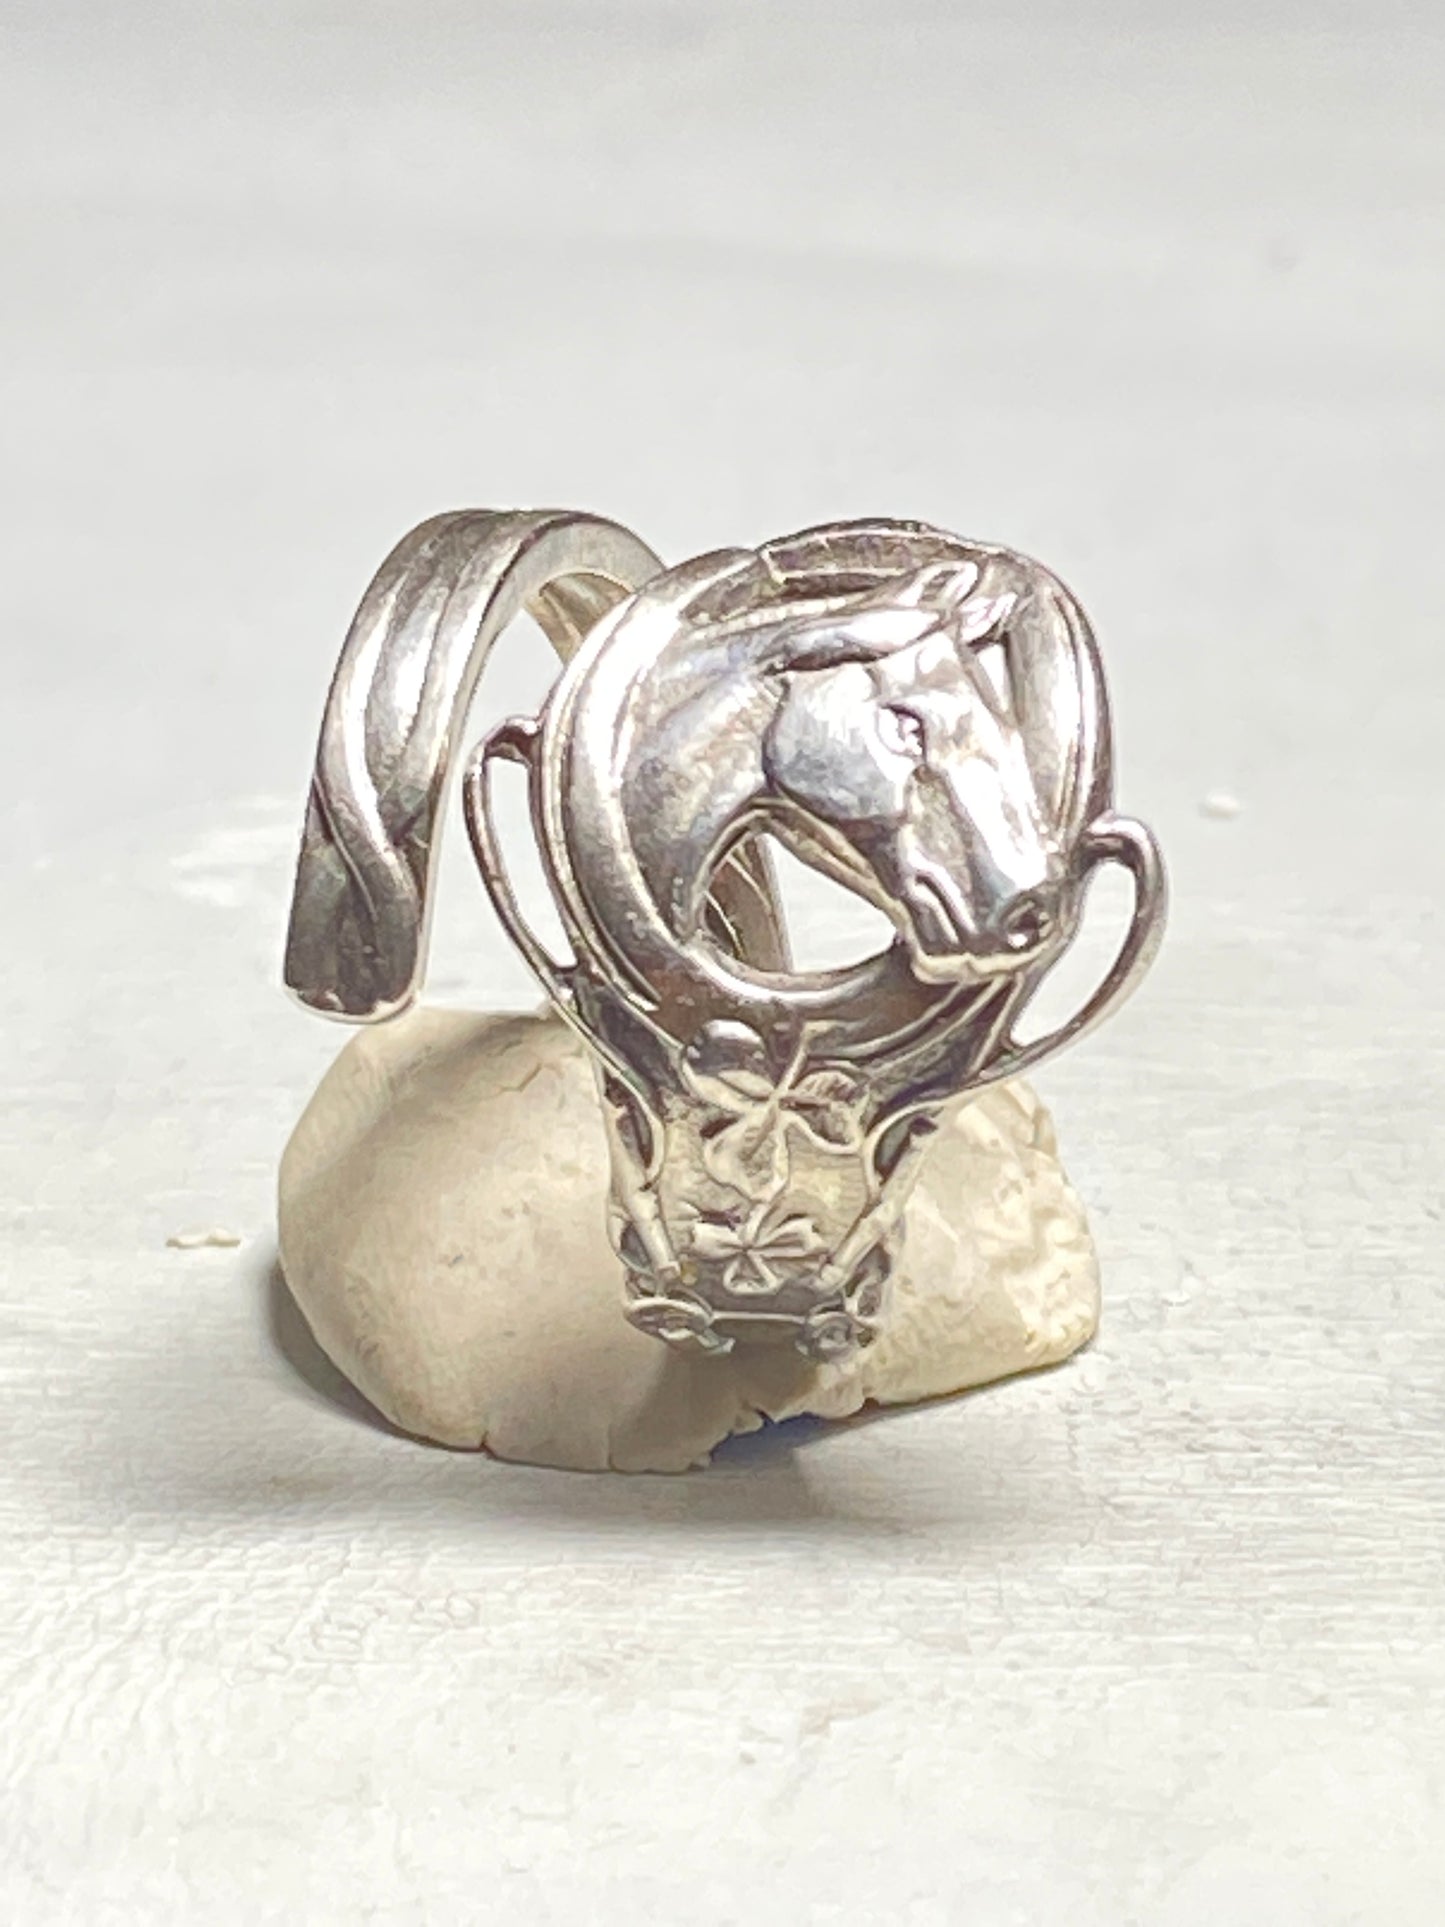 Spoon ring horse band Cowgirl Horseshoe Good Luck Three Leaf Clover sterling silver